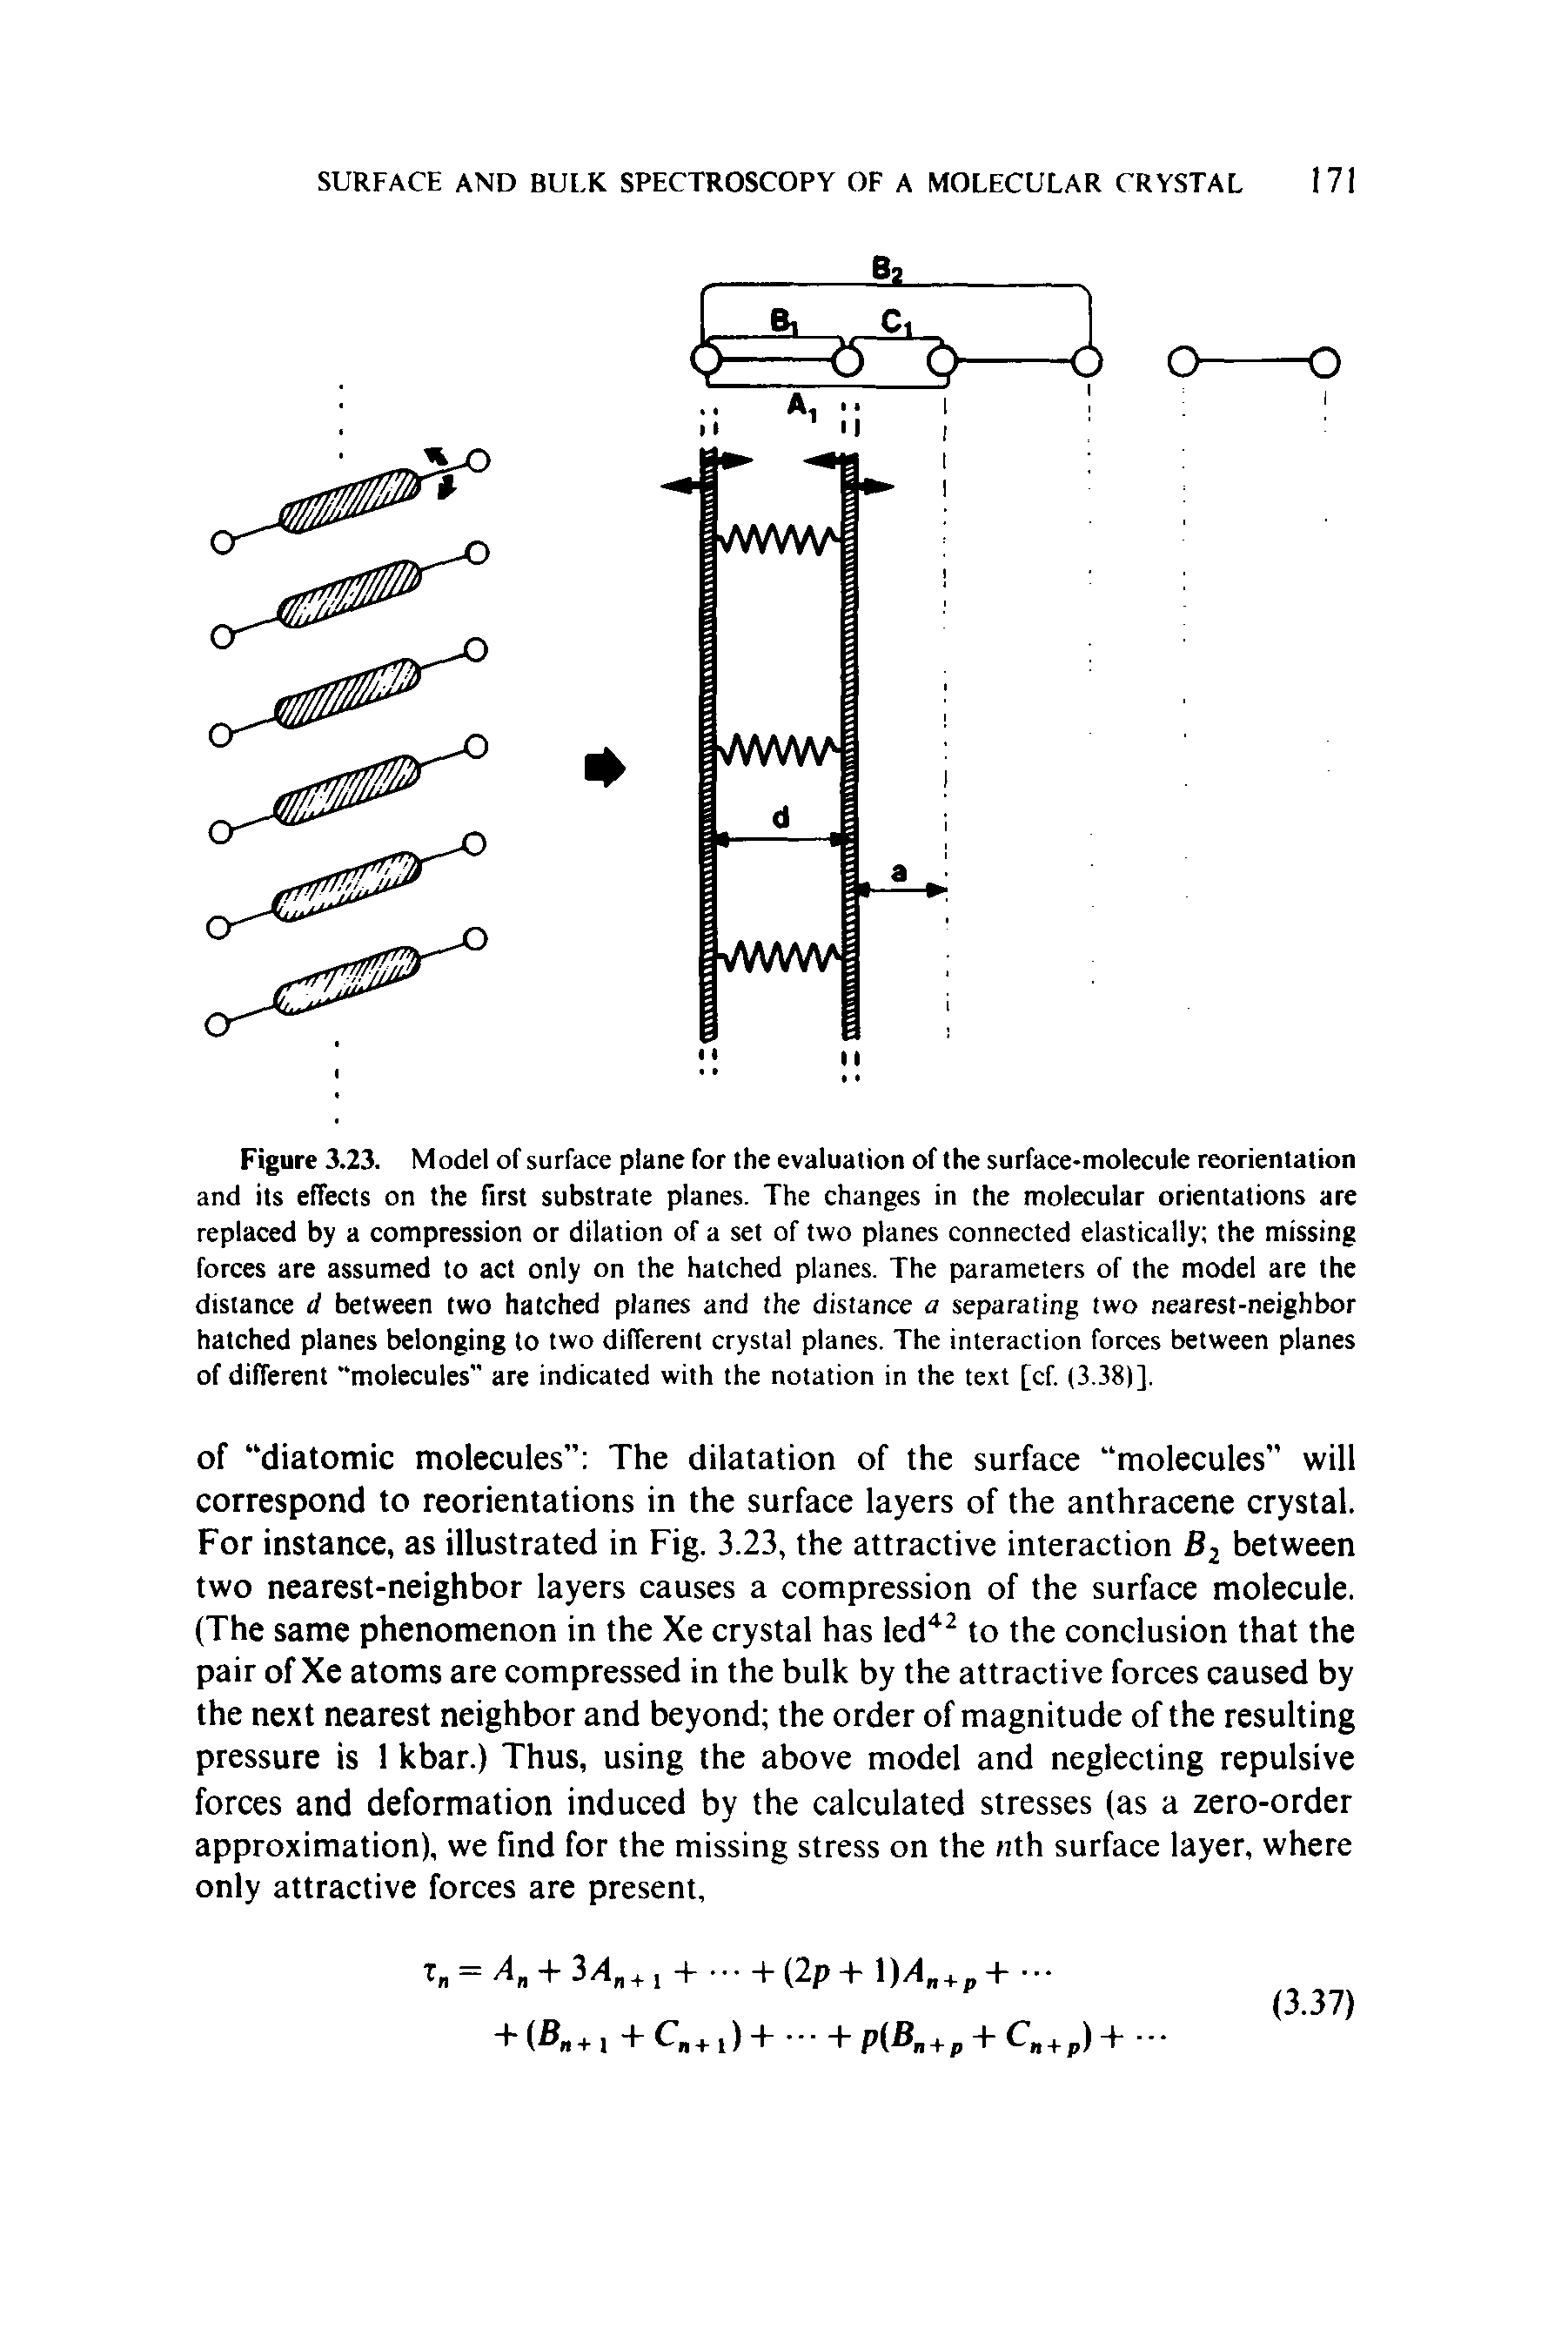 Figure 3.23. Model of surface plane for the evaluation of the surface-molecule reorientation and its effects on the first substrate planes. The changes in the molecular orientations are replaced by a compression or dilation of a set of two planes connected elastically the missing forces are assumed to act only on the hatched planes. The parameters of the model are the distance d between two hatched planes and the distance a separating two nearest-neighbor hatched planes belonging to two different crystal planes. The interaction forces between planes of different "molecules" are indicated with the notation in the text [cf. (3.38)].